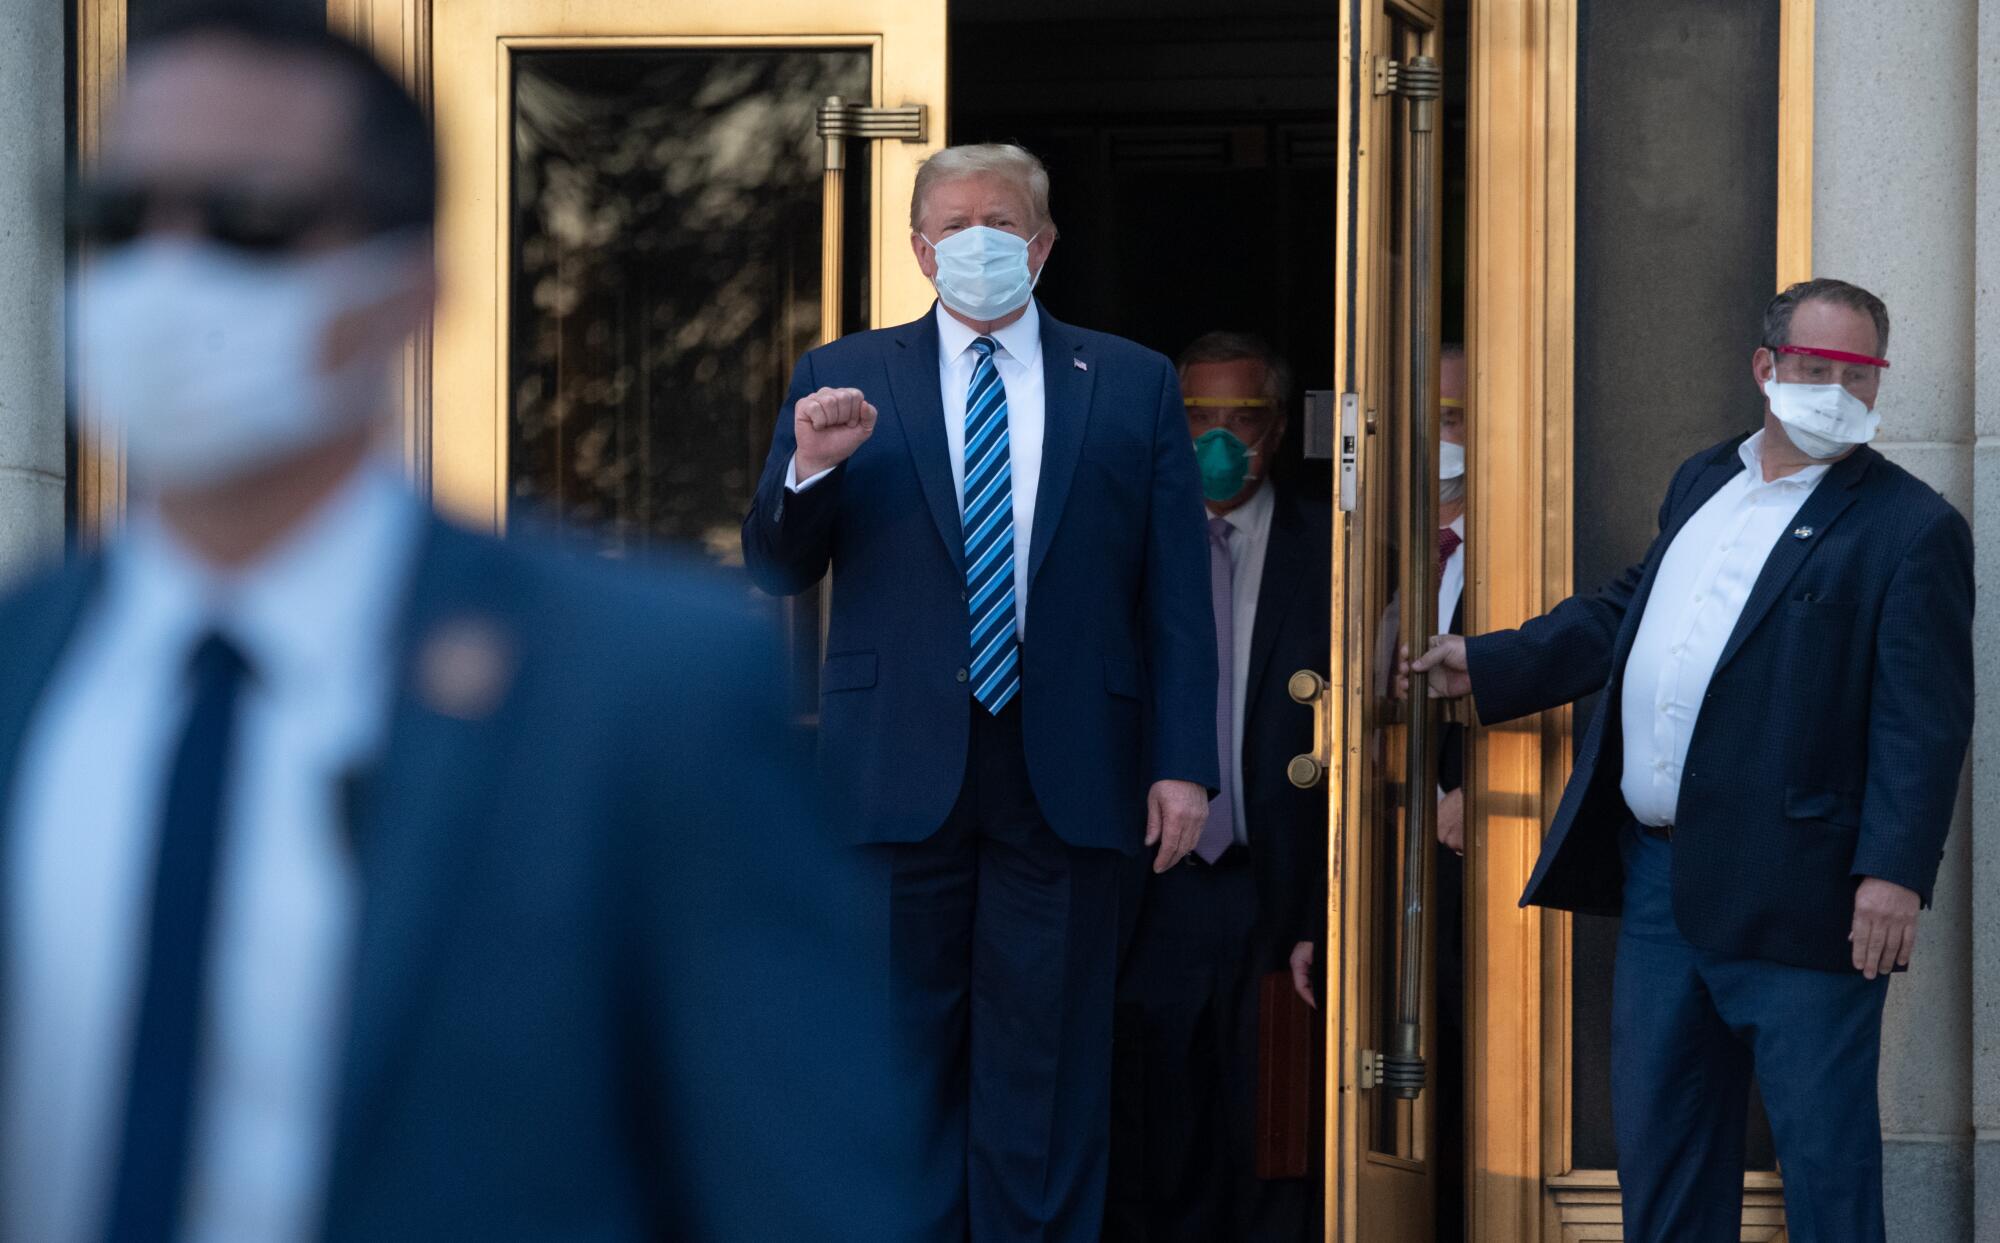 President Trump walks out of Walter Reed hospital in Bethesda, Md.